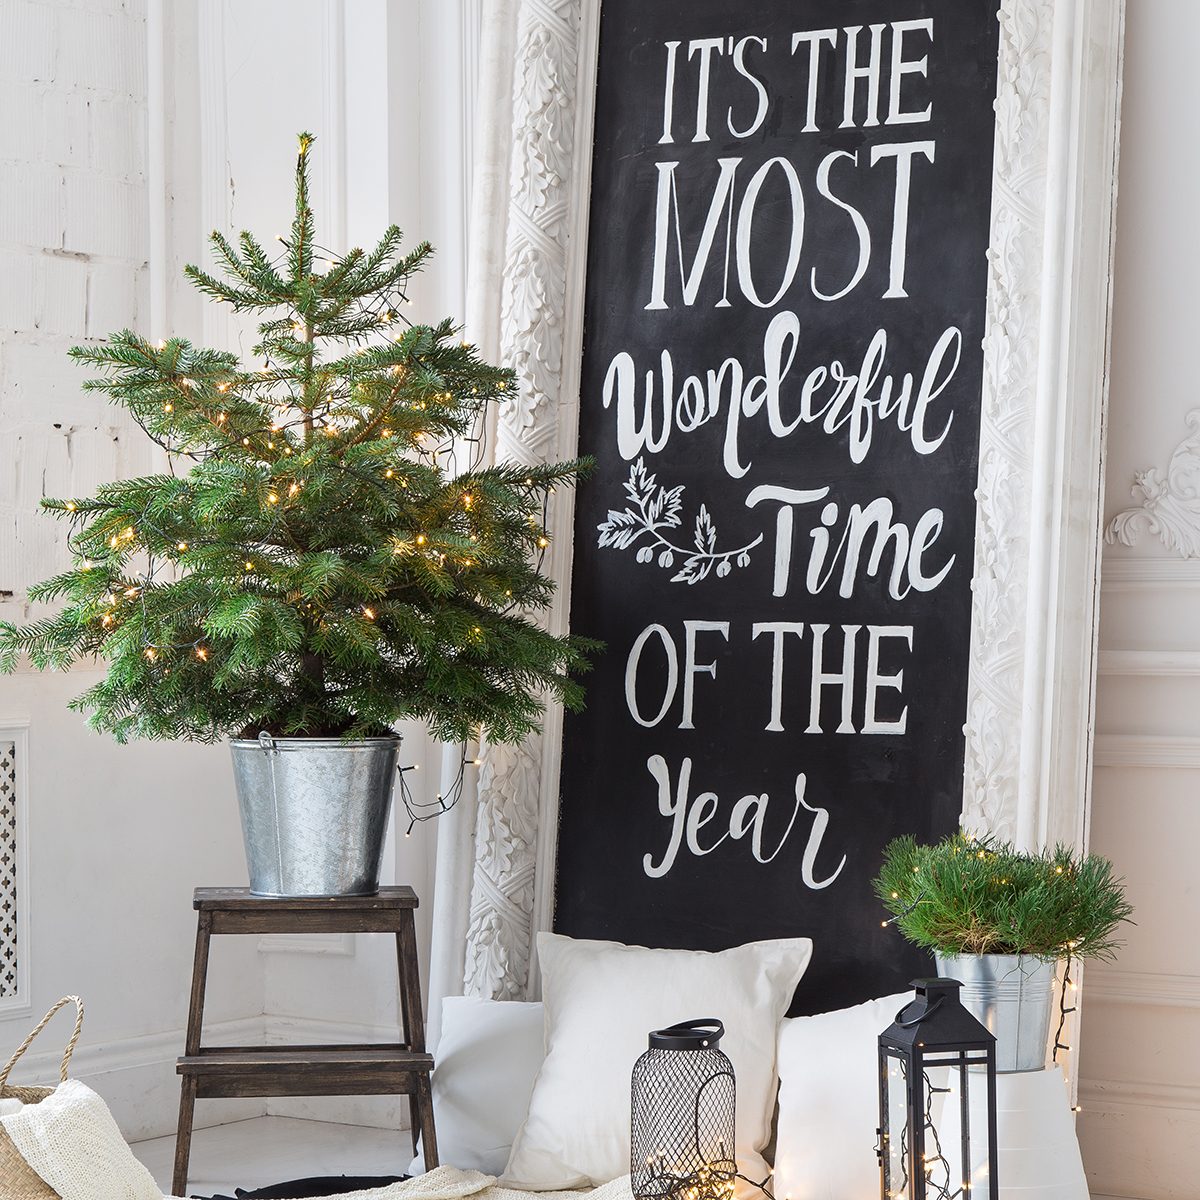 https://www.tasteofhome.com/wp-content/uploads/2019/09/How-to-Decorate-for-Christmas_shutterstock_767641441.jpg?fit=700%2C700